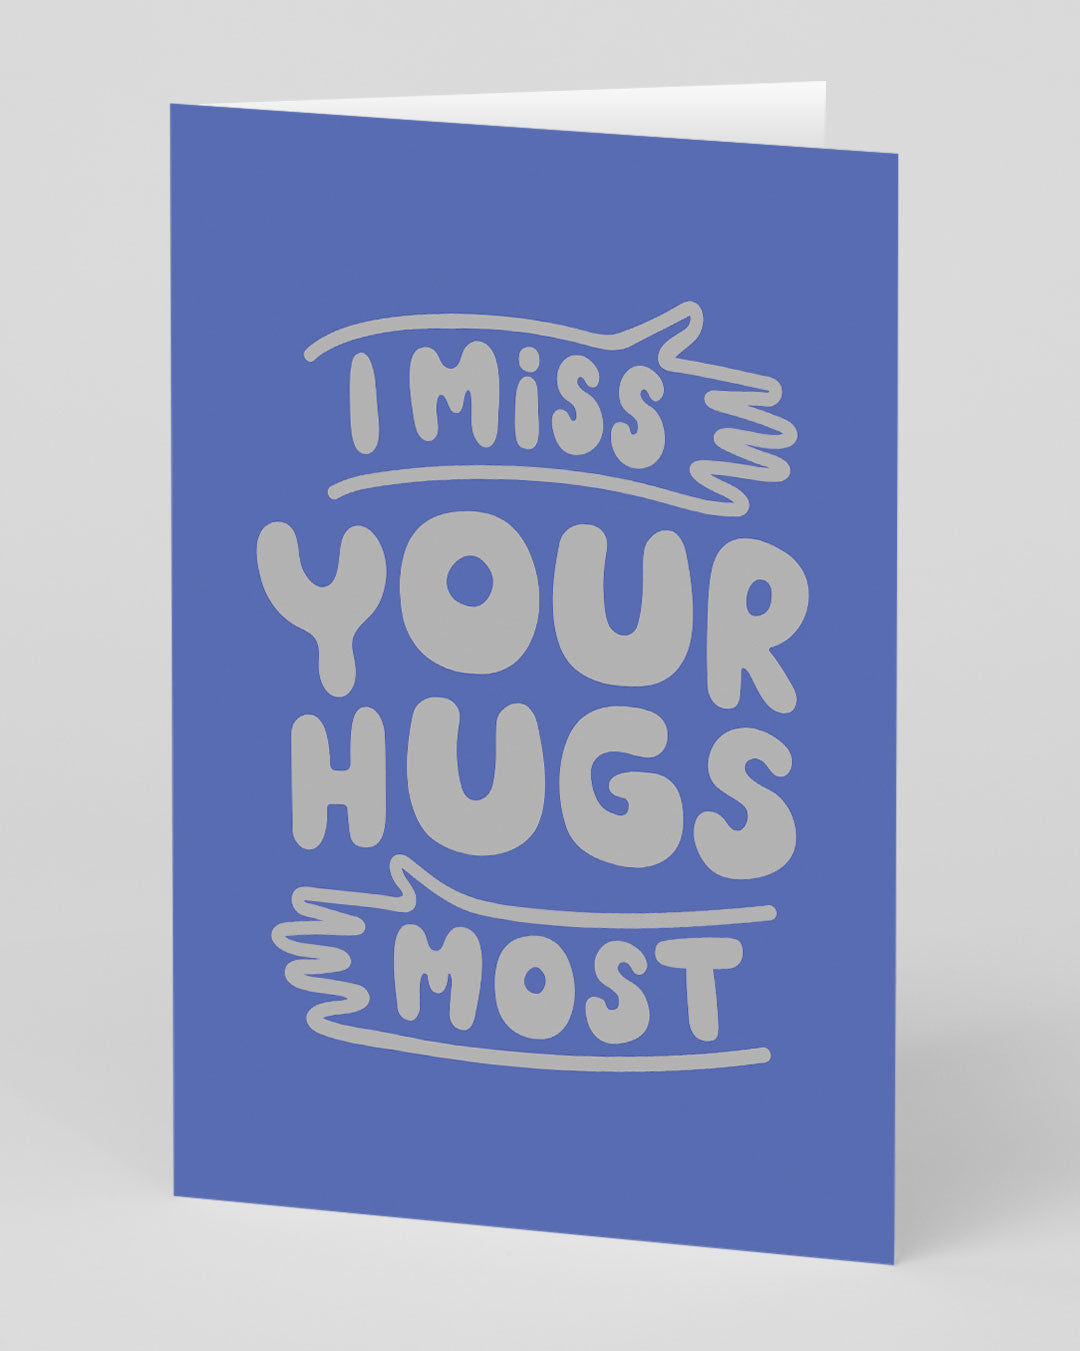 I Miss Your Hugs Most Greeting Card